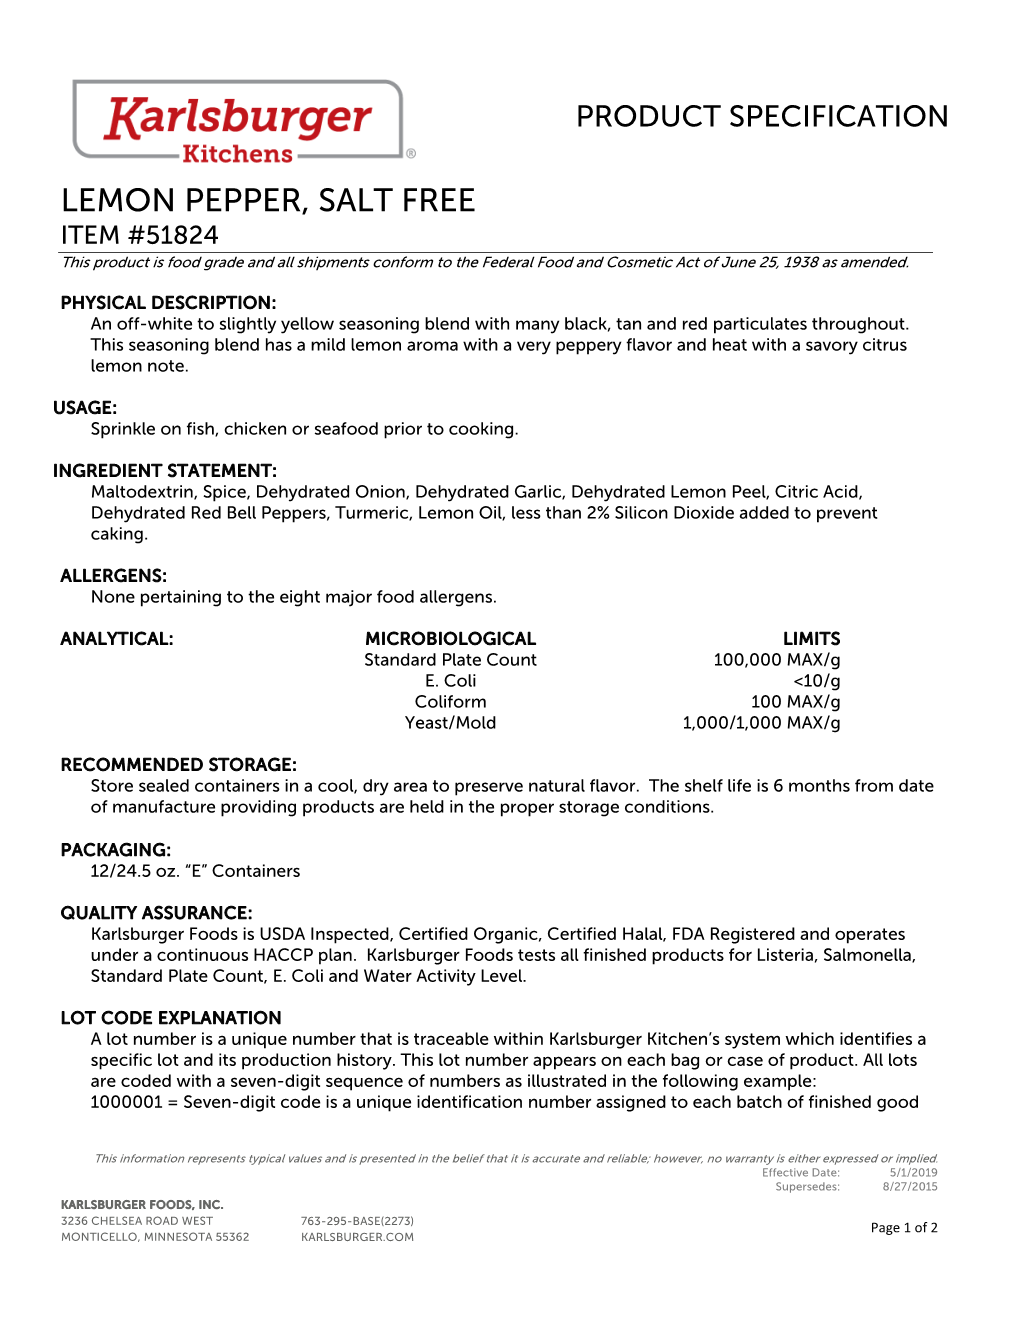 LEMON PEPPER, SALT FREE ITEM #51824 This Product Is Food Grade and All Shipments Conform to the Federal Food and Cosmetic Act of June 25, 1938 As Amended